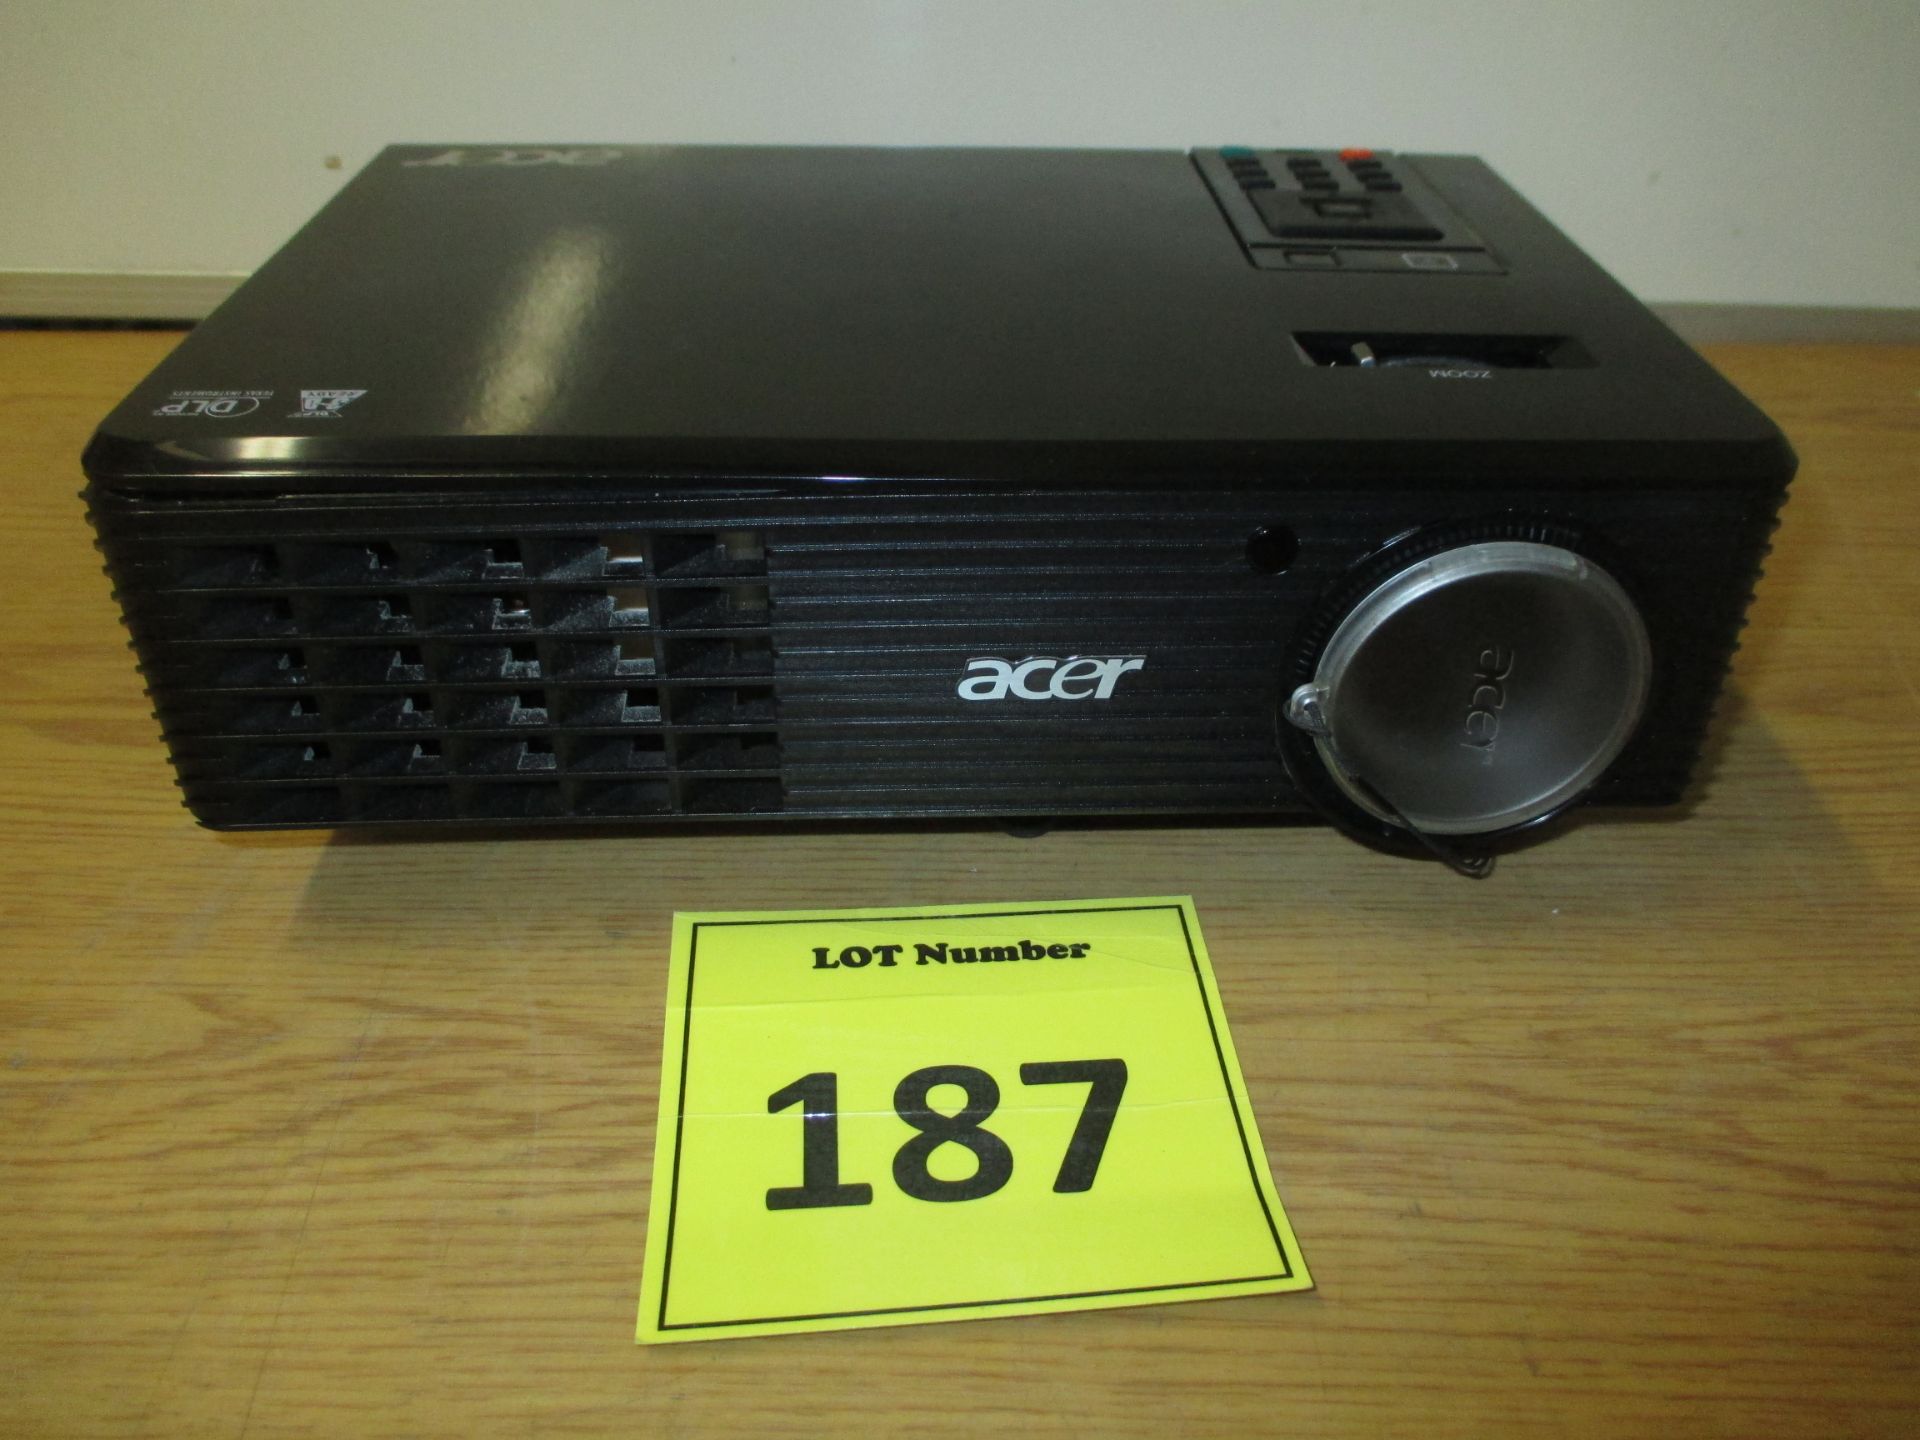 ACER X110 DLP PROJECTOR. MODEL DSV0817. IN CARRY CASE WITH REMOTE CONTROL